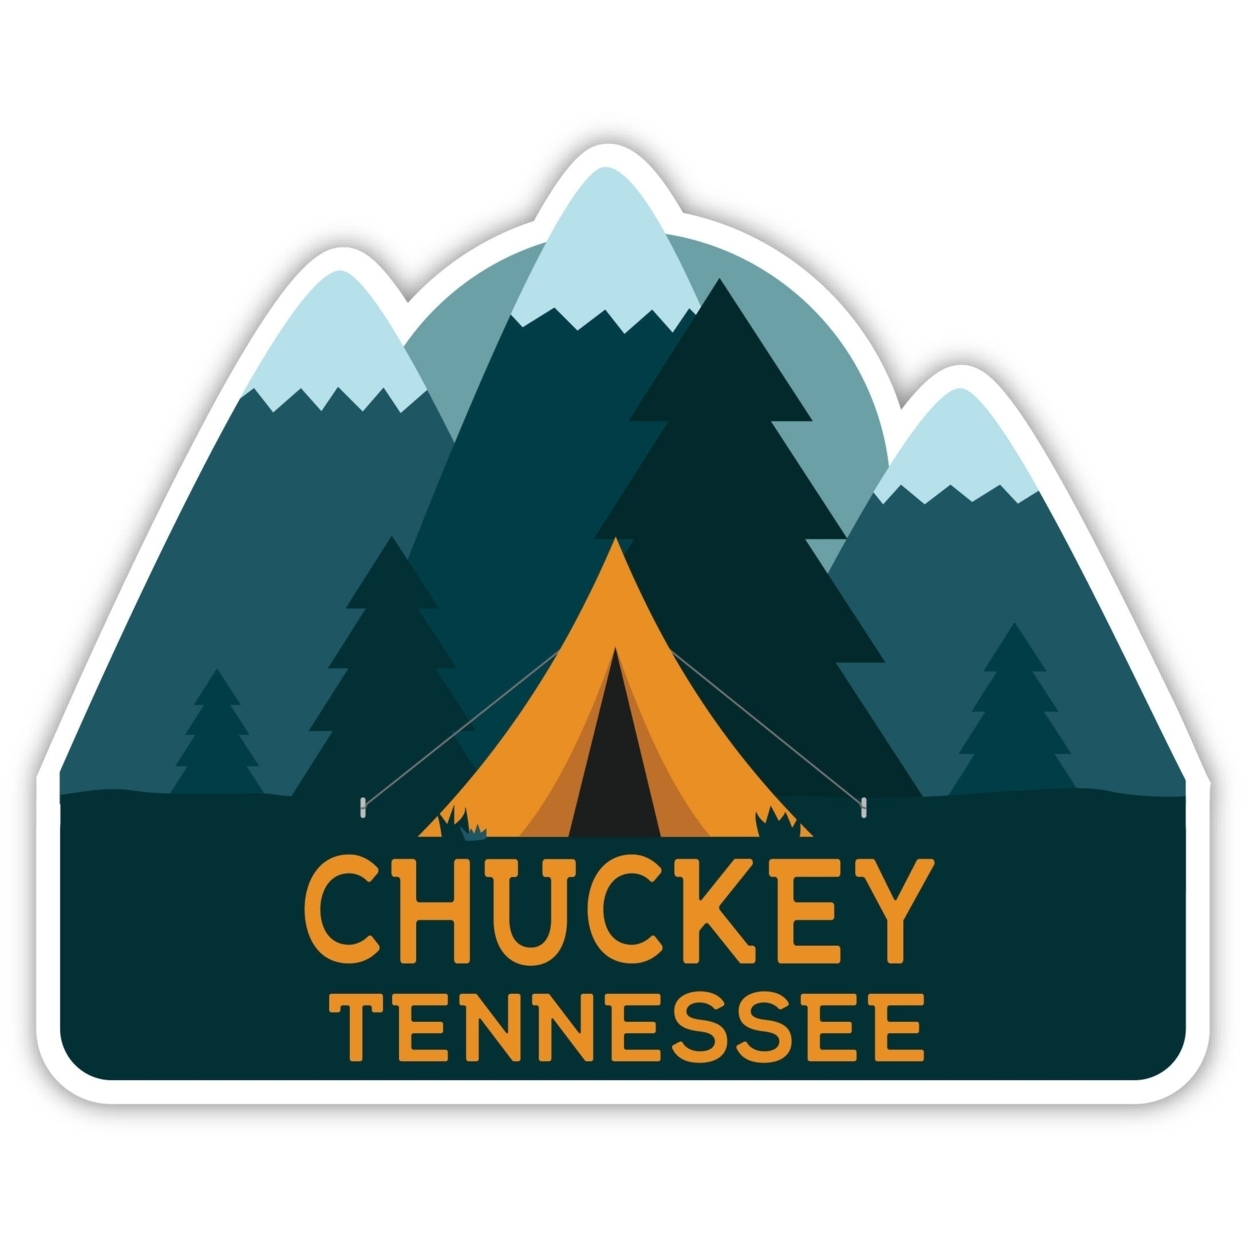 Chuckey Tennessee Souvenir Decorative Stickers (Choose Theme And Size) - 4-Pack, 4-Inch, Tent